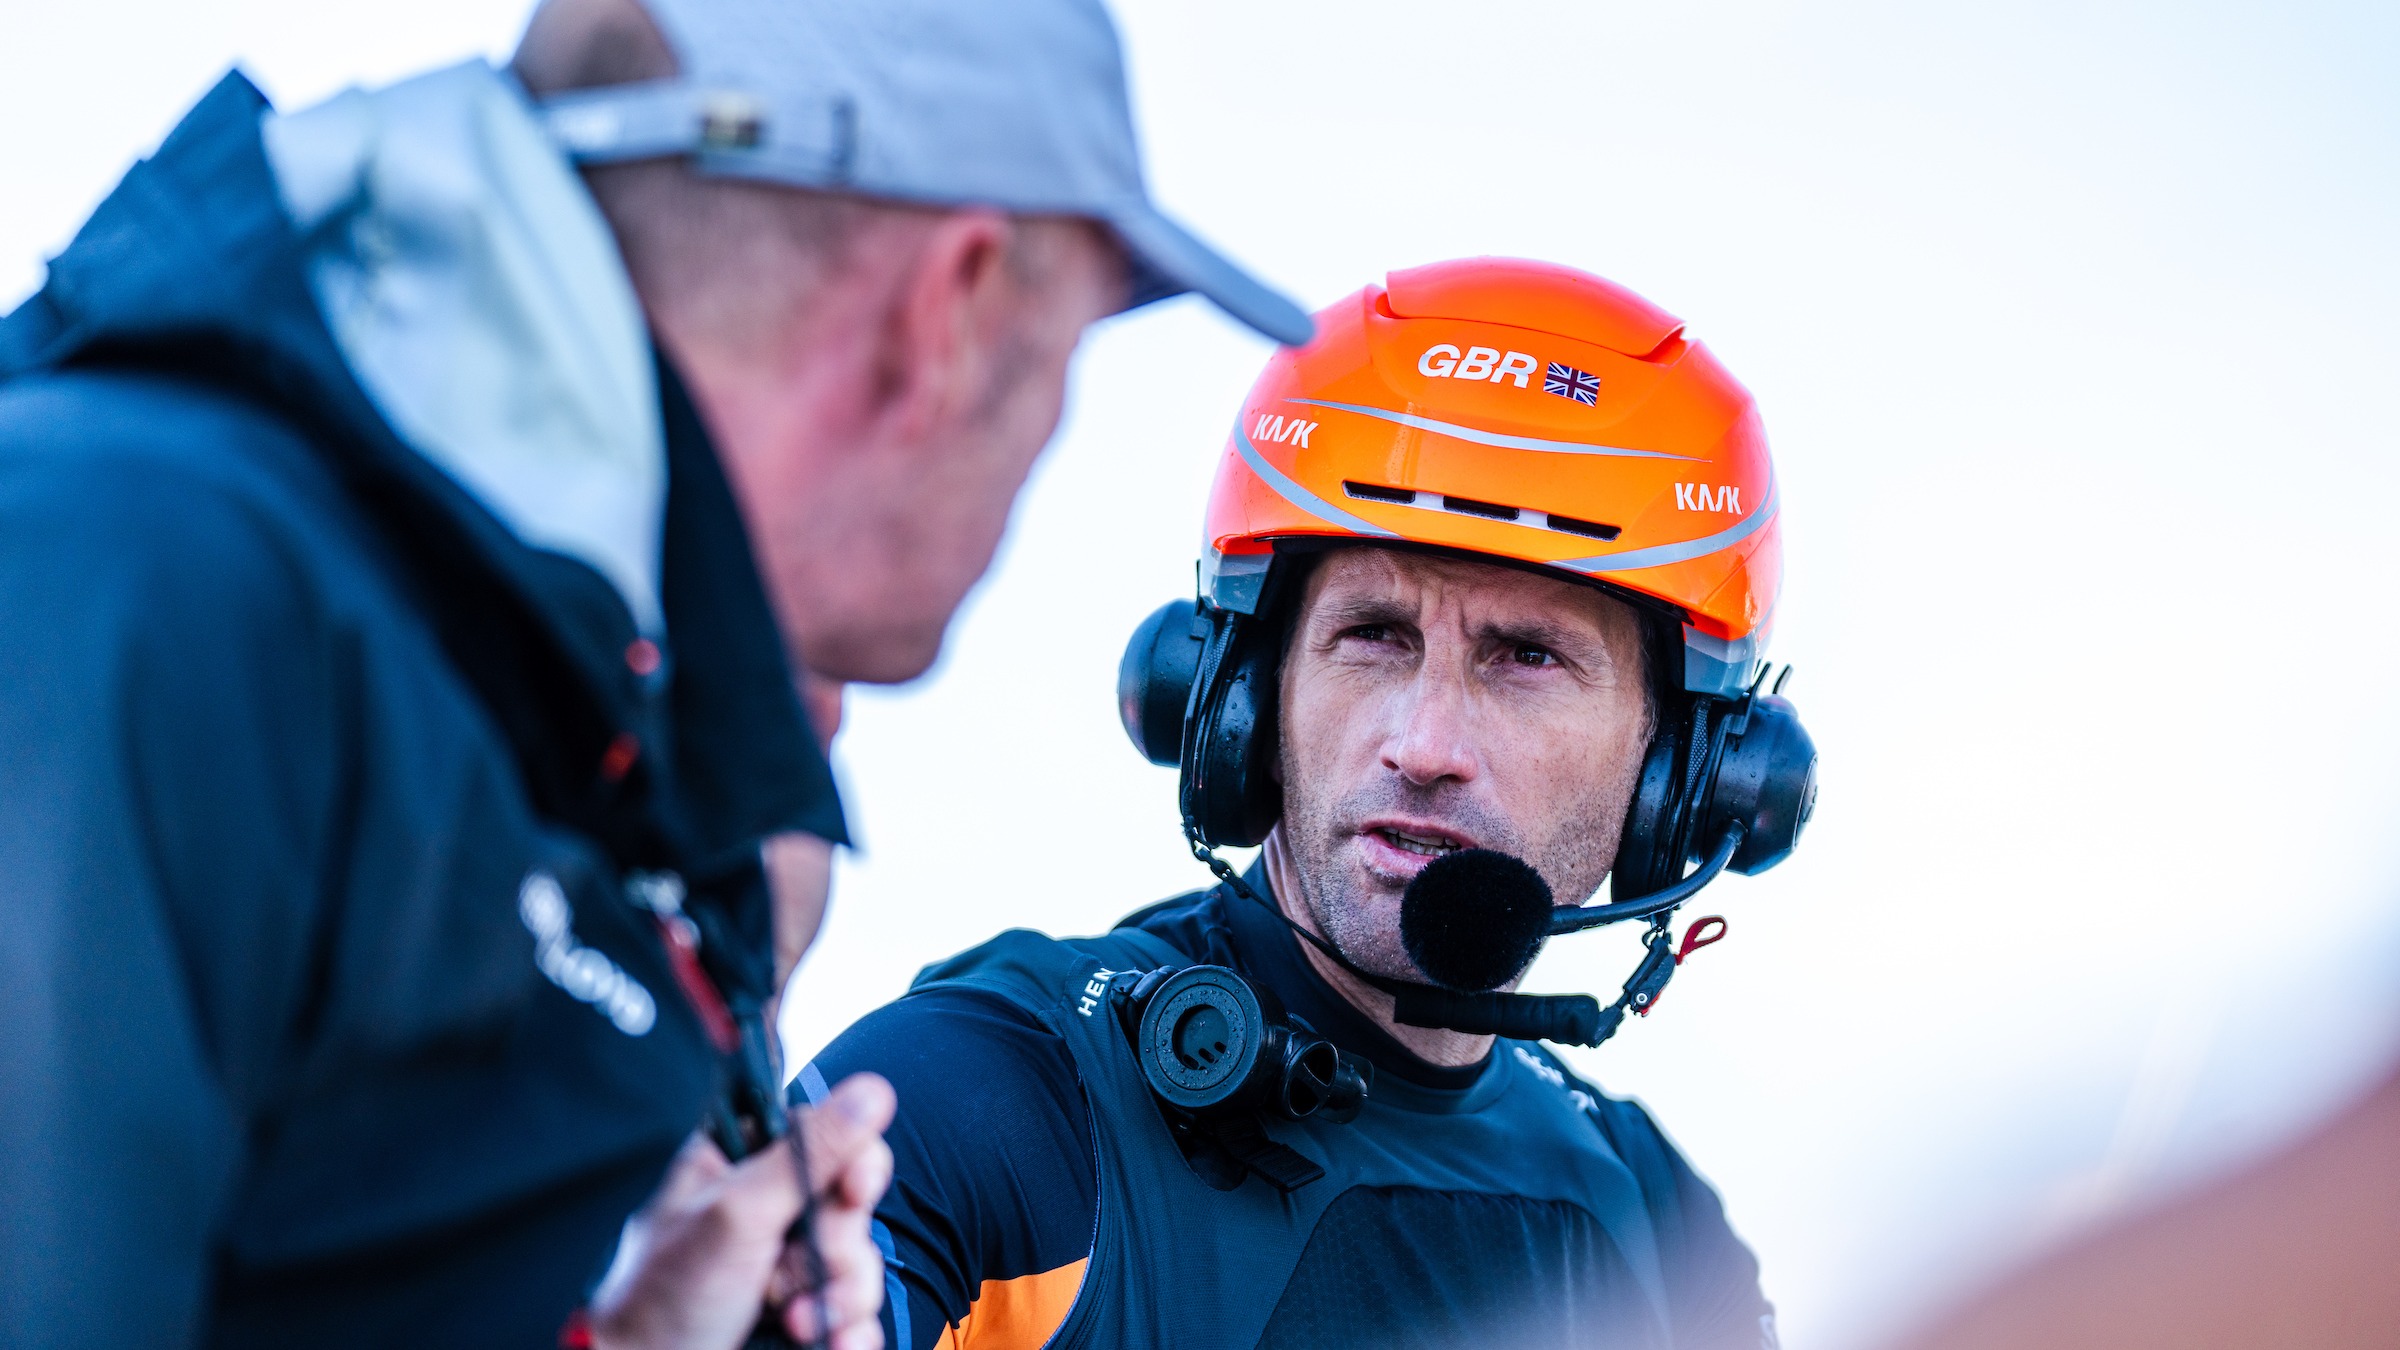 Season 3 // Great Britain Grand Prix // Ben Ainslie close up on race day one